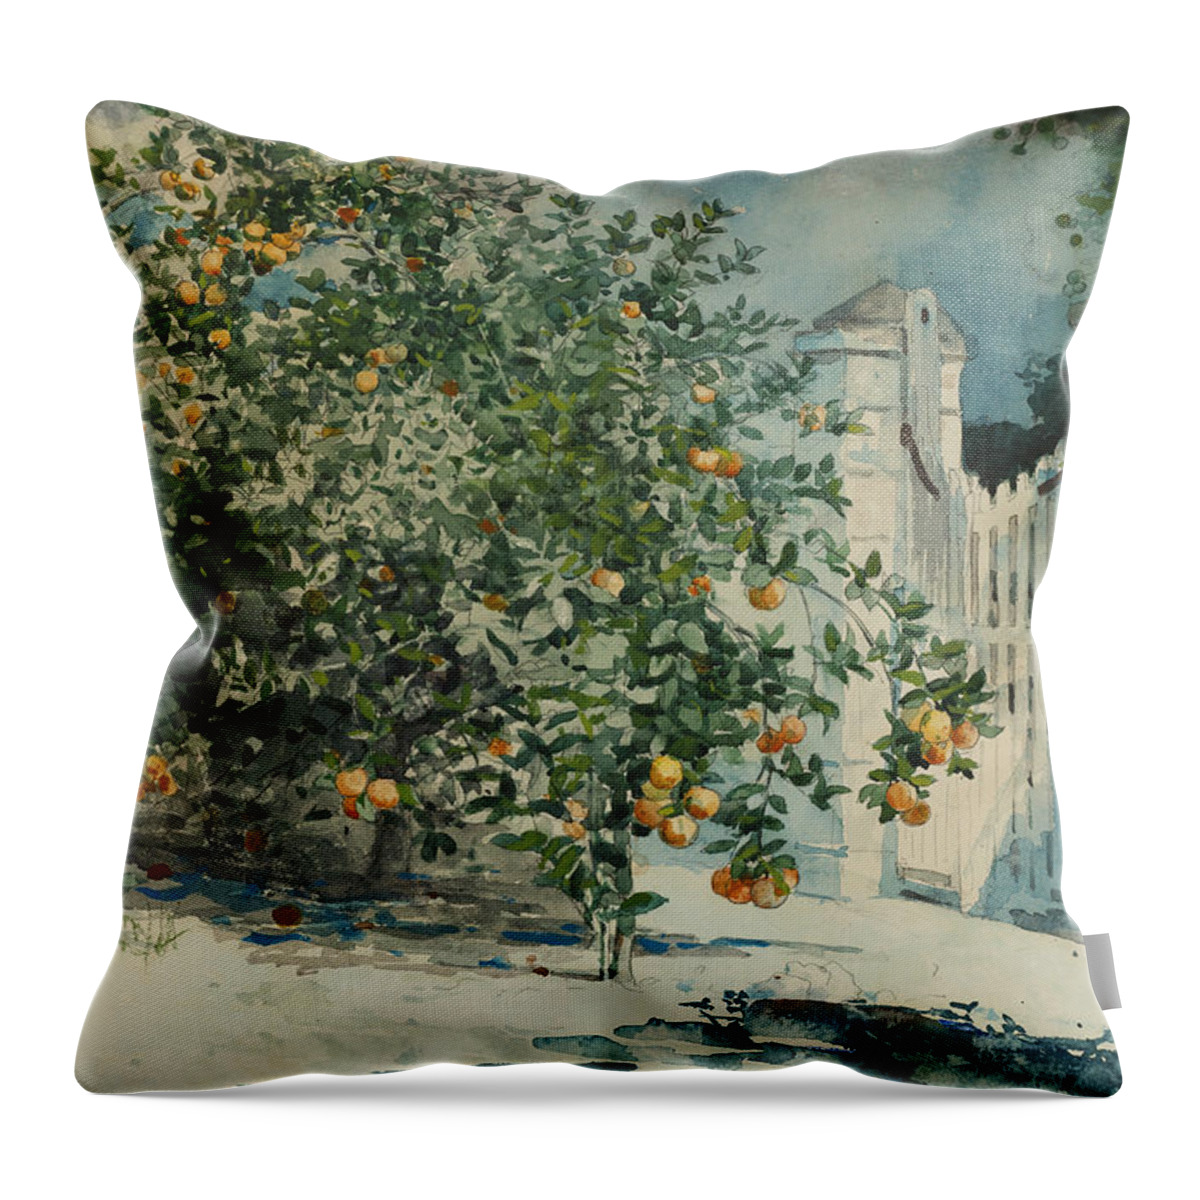 19th Century American Painters Throw Pillow featuring the painting Orange trees and gate by Winslow Homer